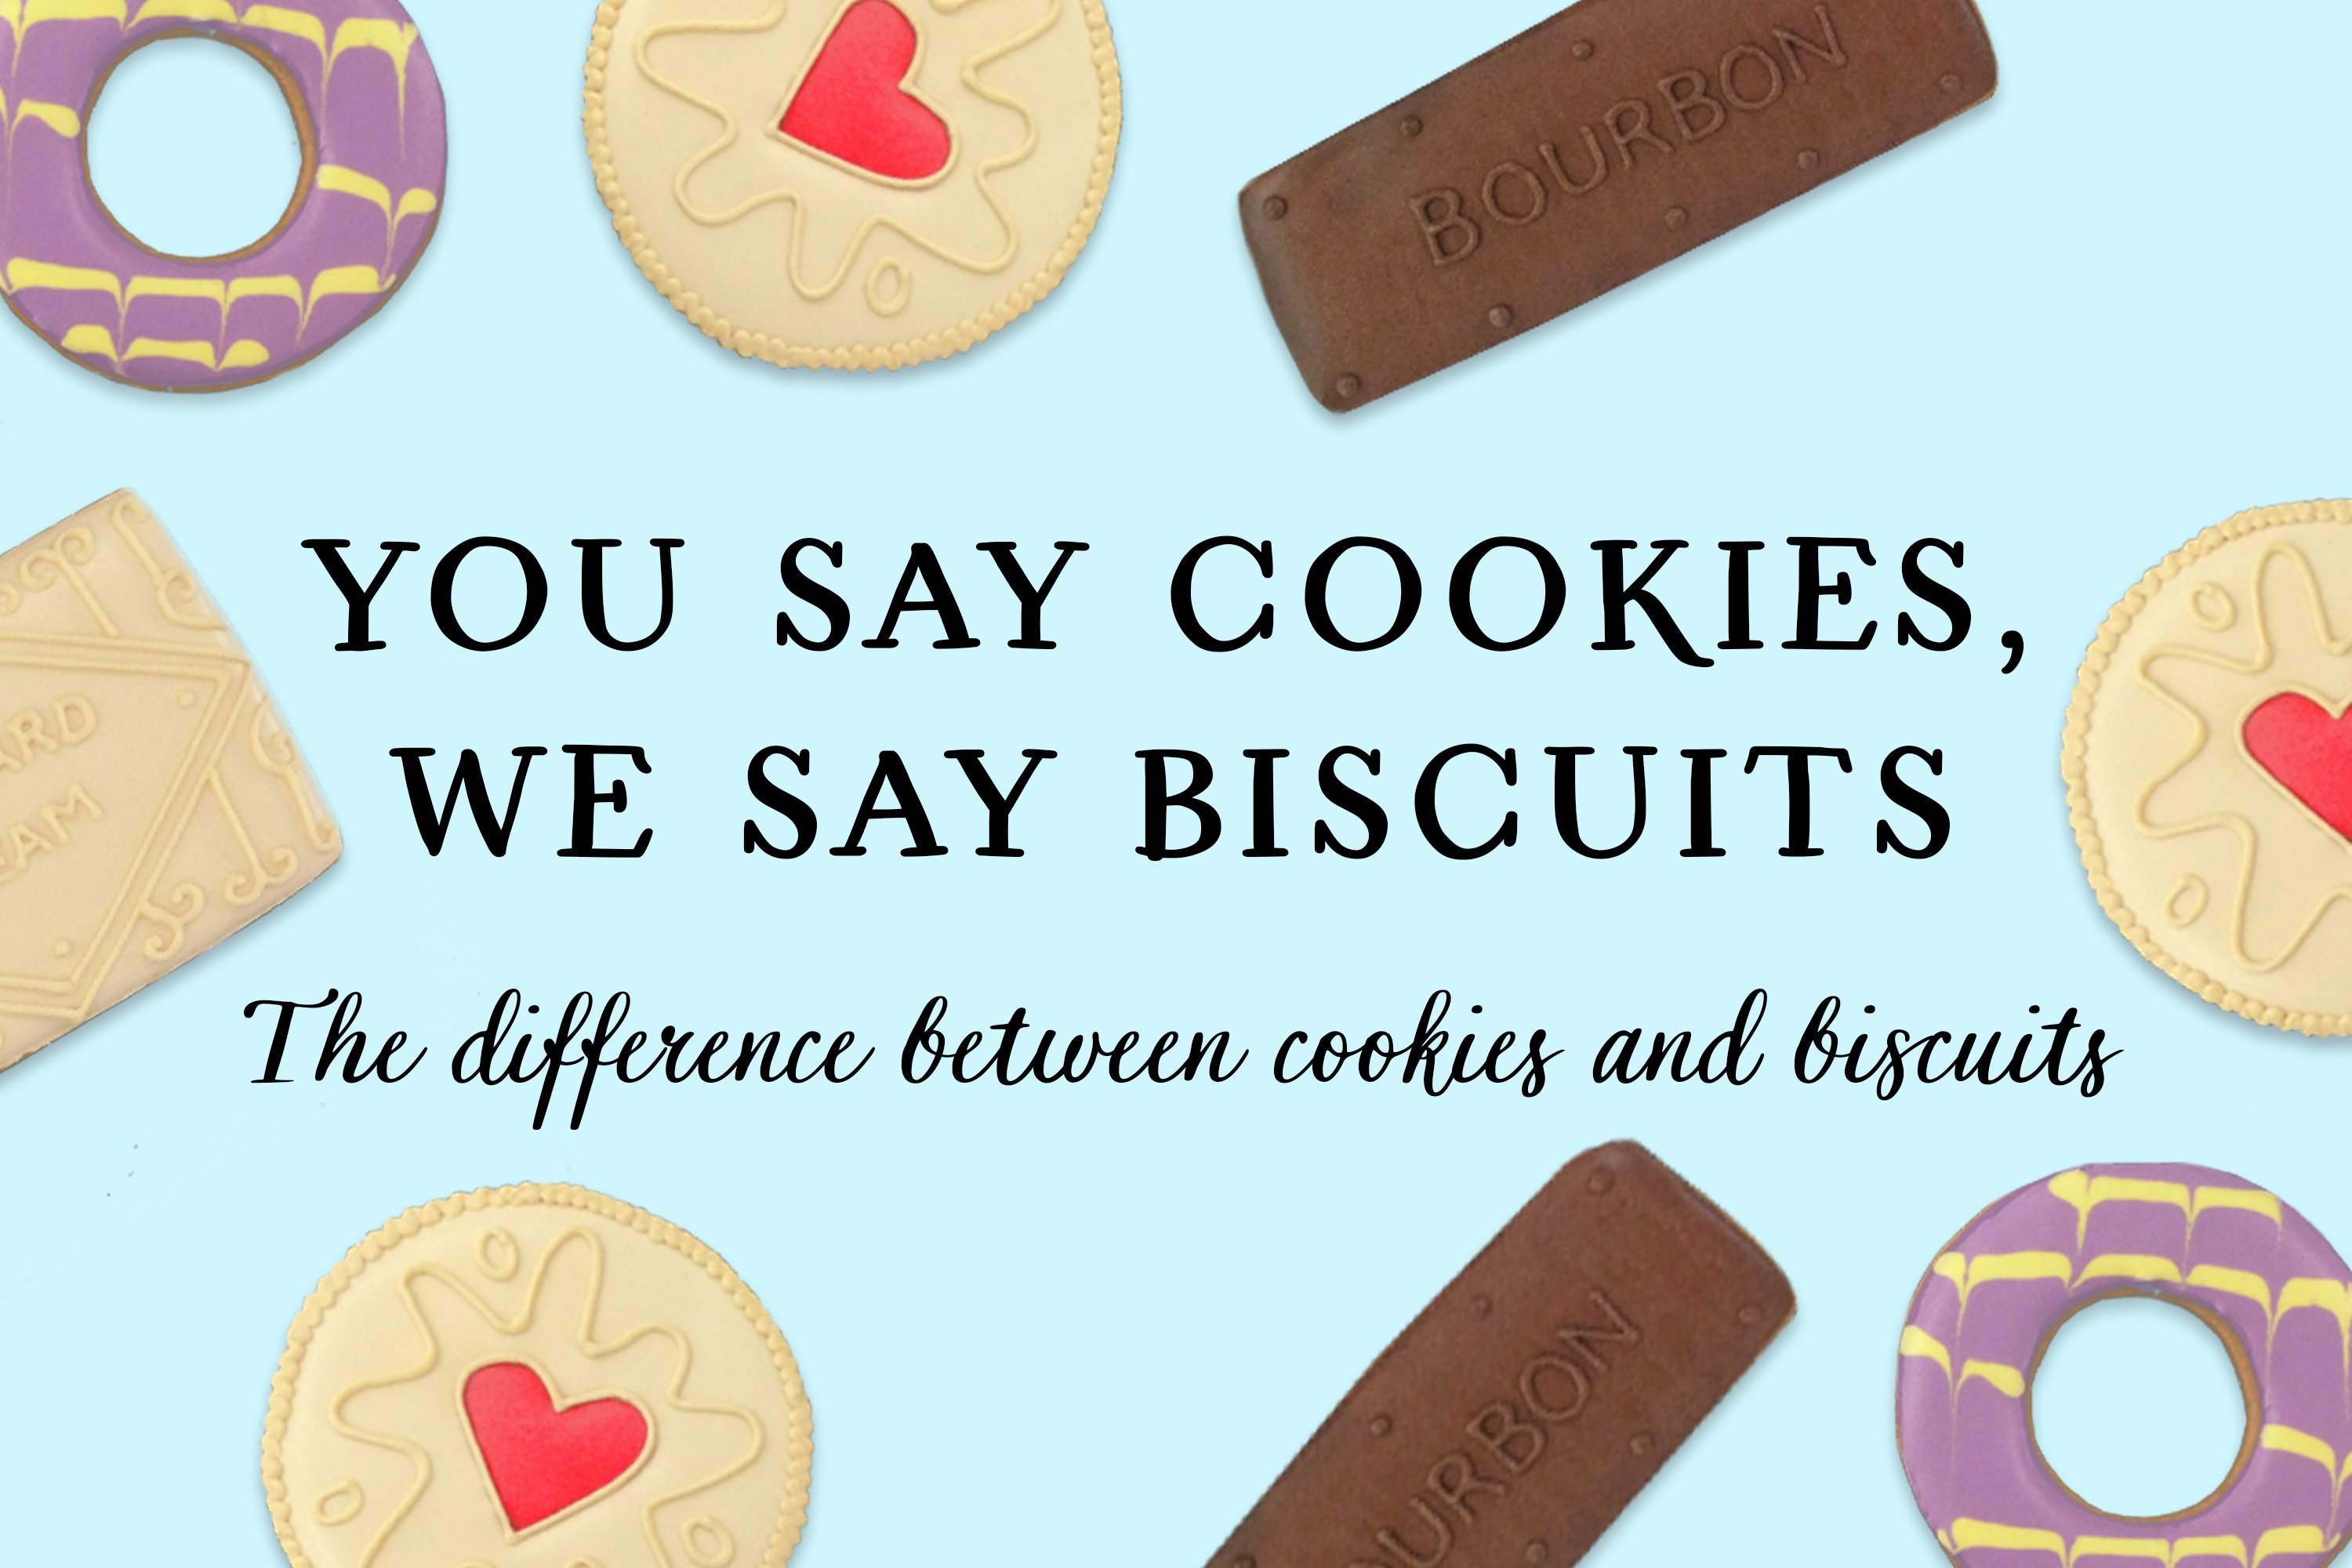 The difference between cookies and biscuits